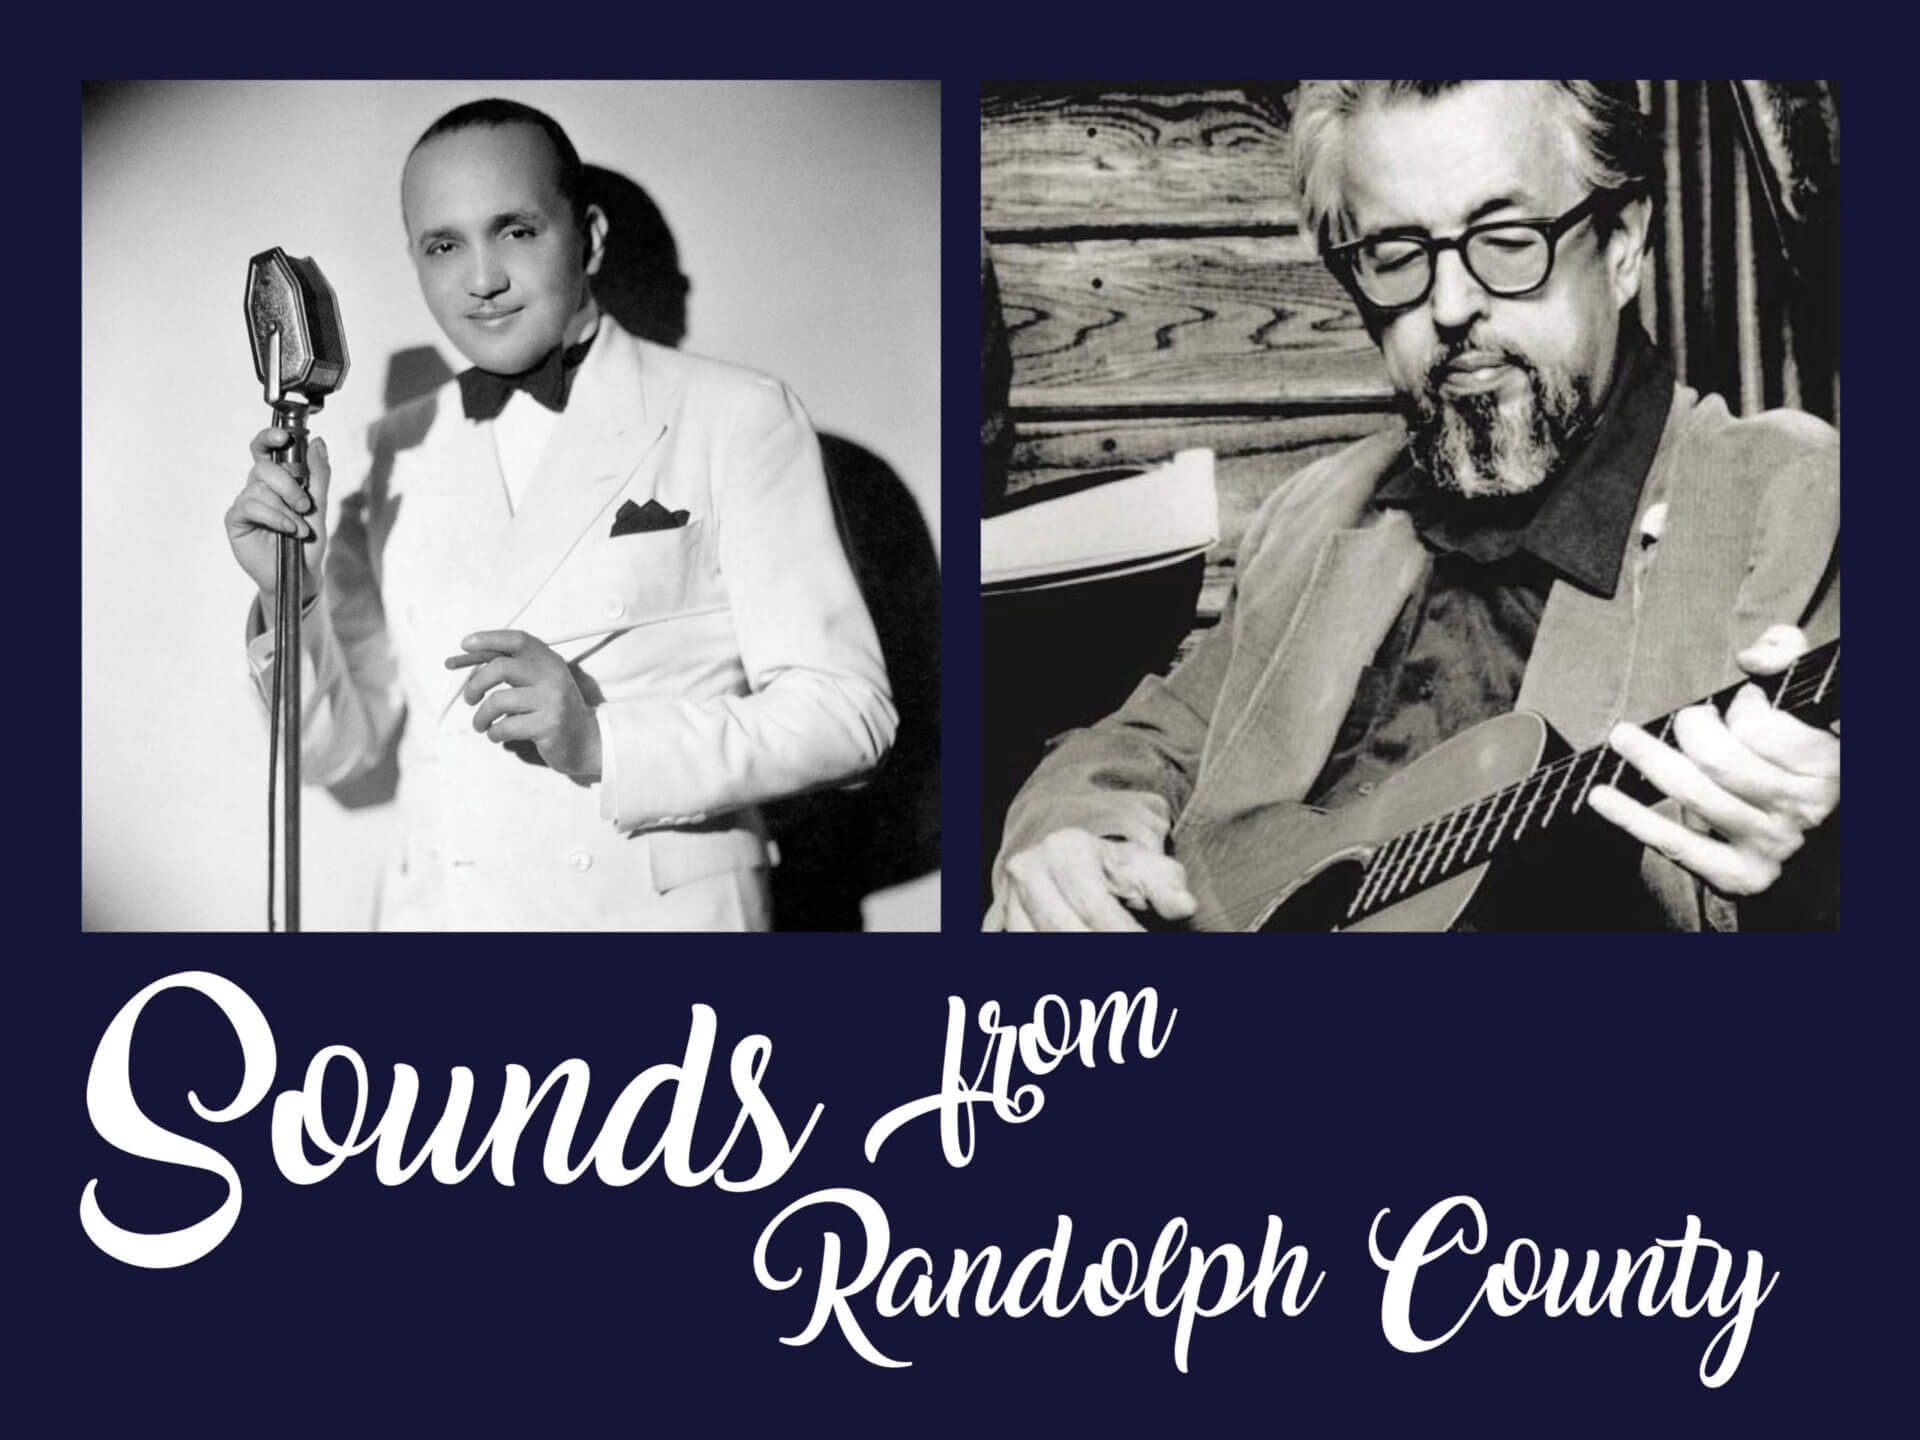 Sounds from Randolph Co